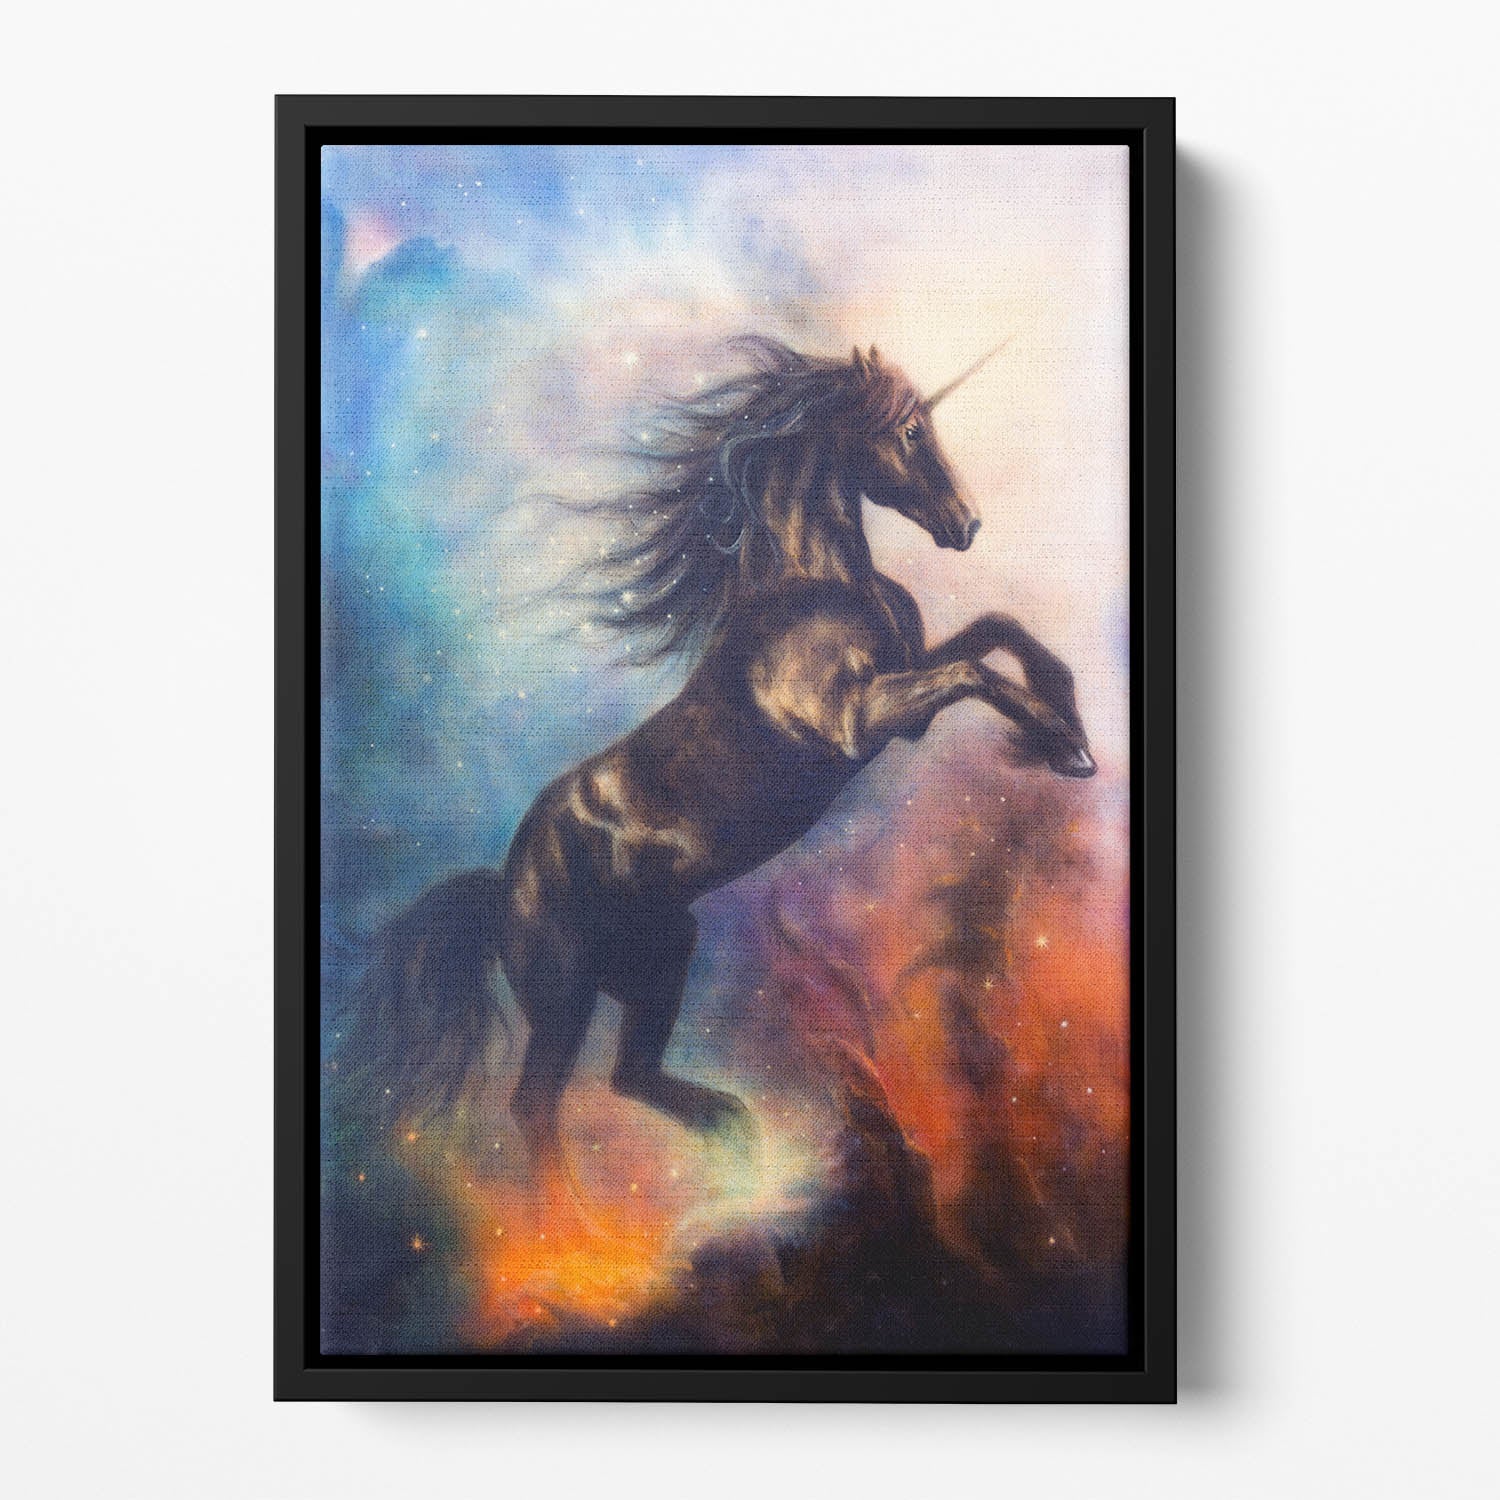 Black unicorn dancing in space Floating Framed Canvas